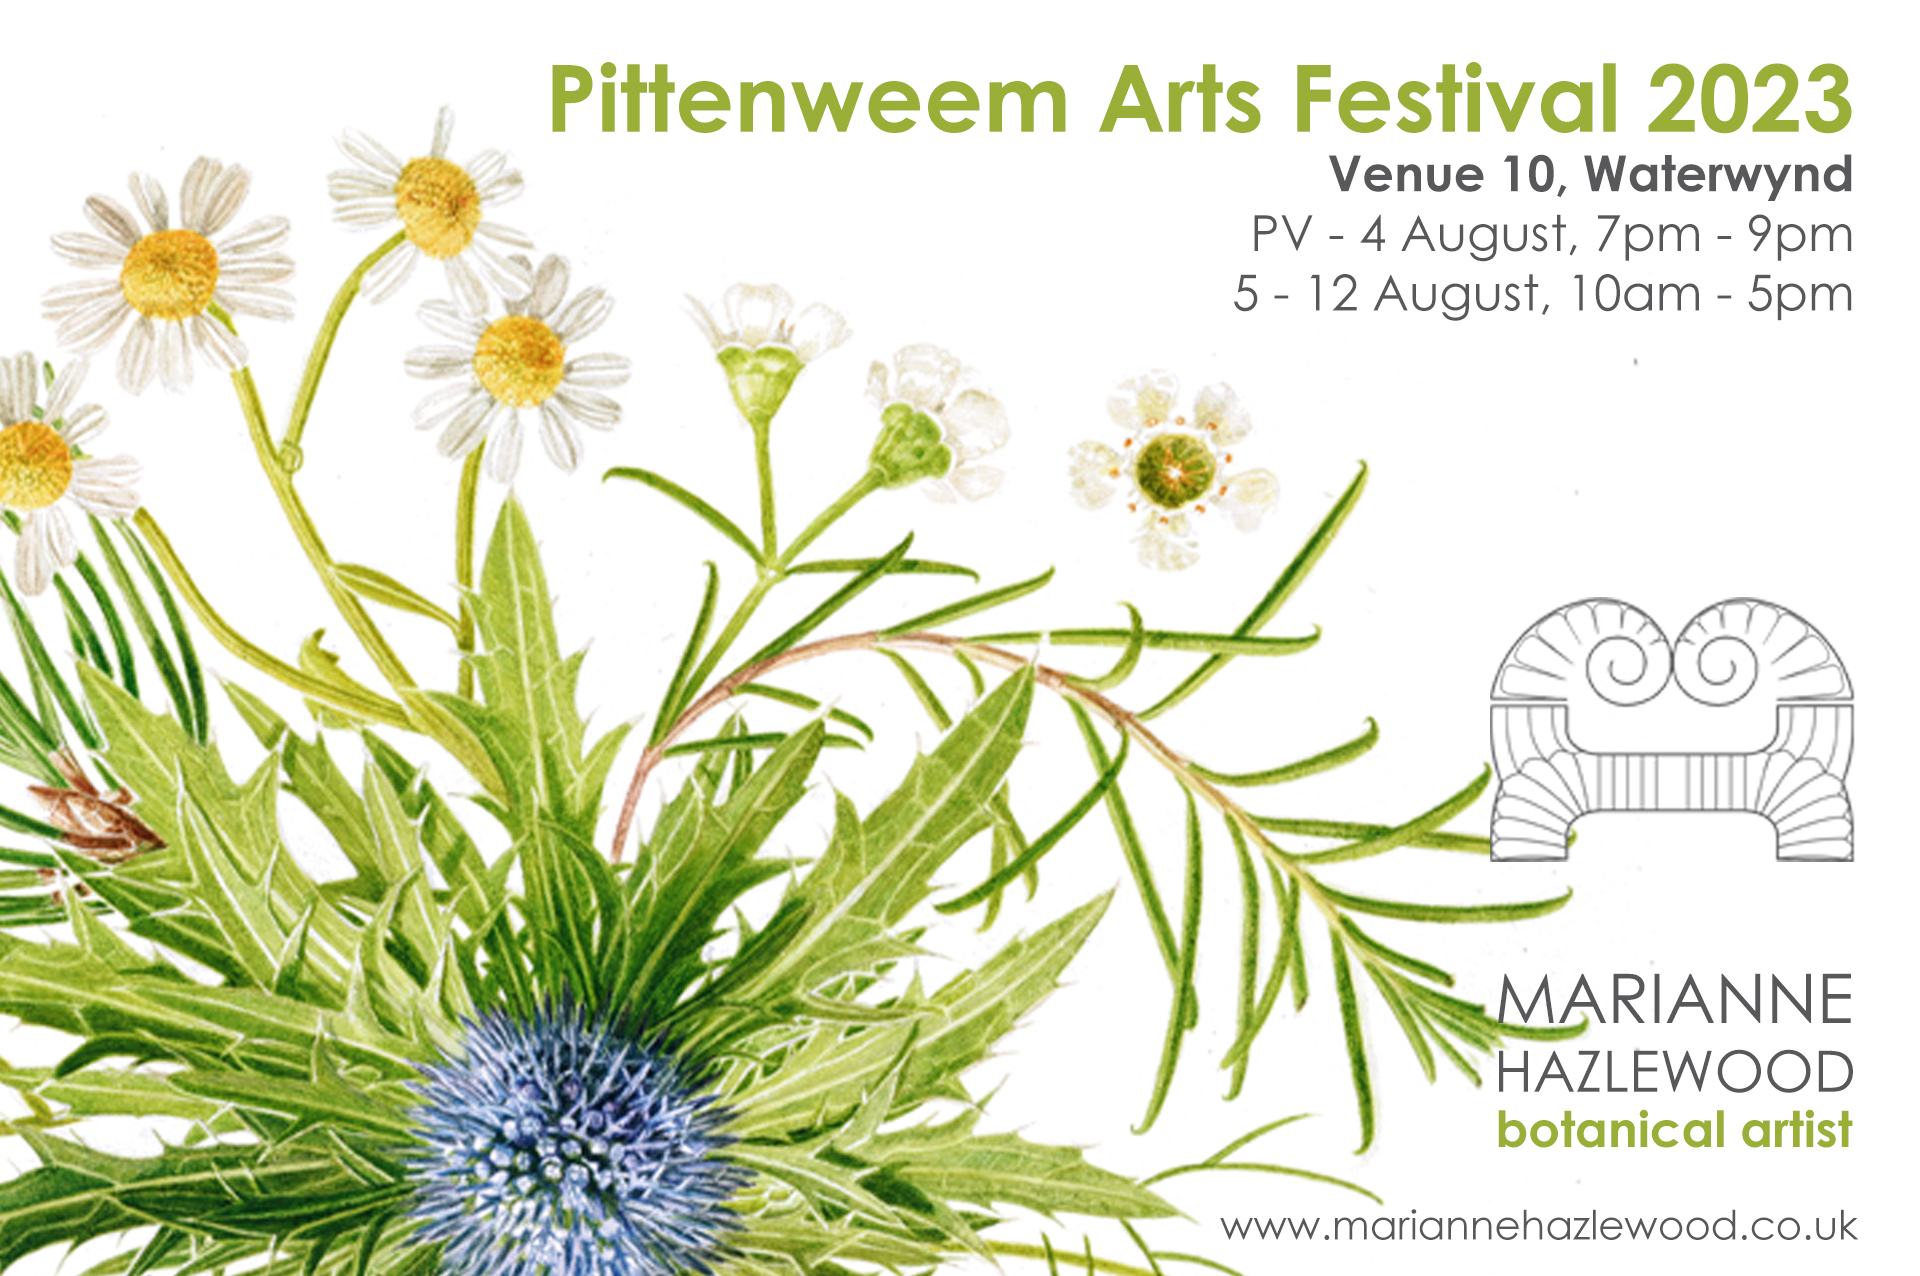 Pittenweem Arts Festival, Venue 10, PV 4th August 7pm - 9pm, 5th - 12th August, 10am - 5pm, Marianne Hazlewood, botanical artist, www,mariannehazlewood.co.uk, bouquet watercolour painting featuring sea thistle, daisies and pine